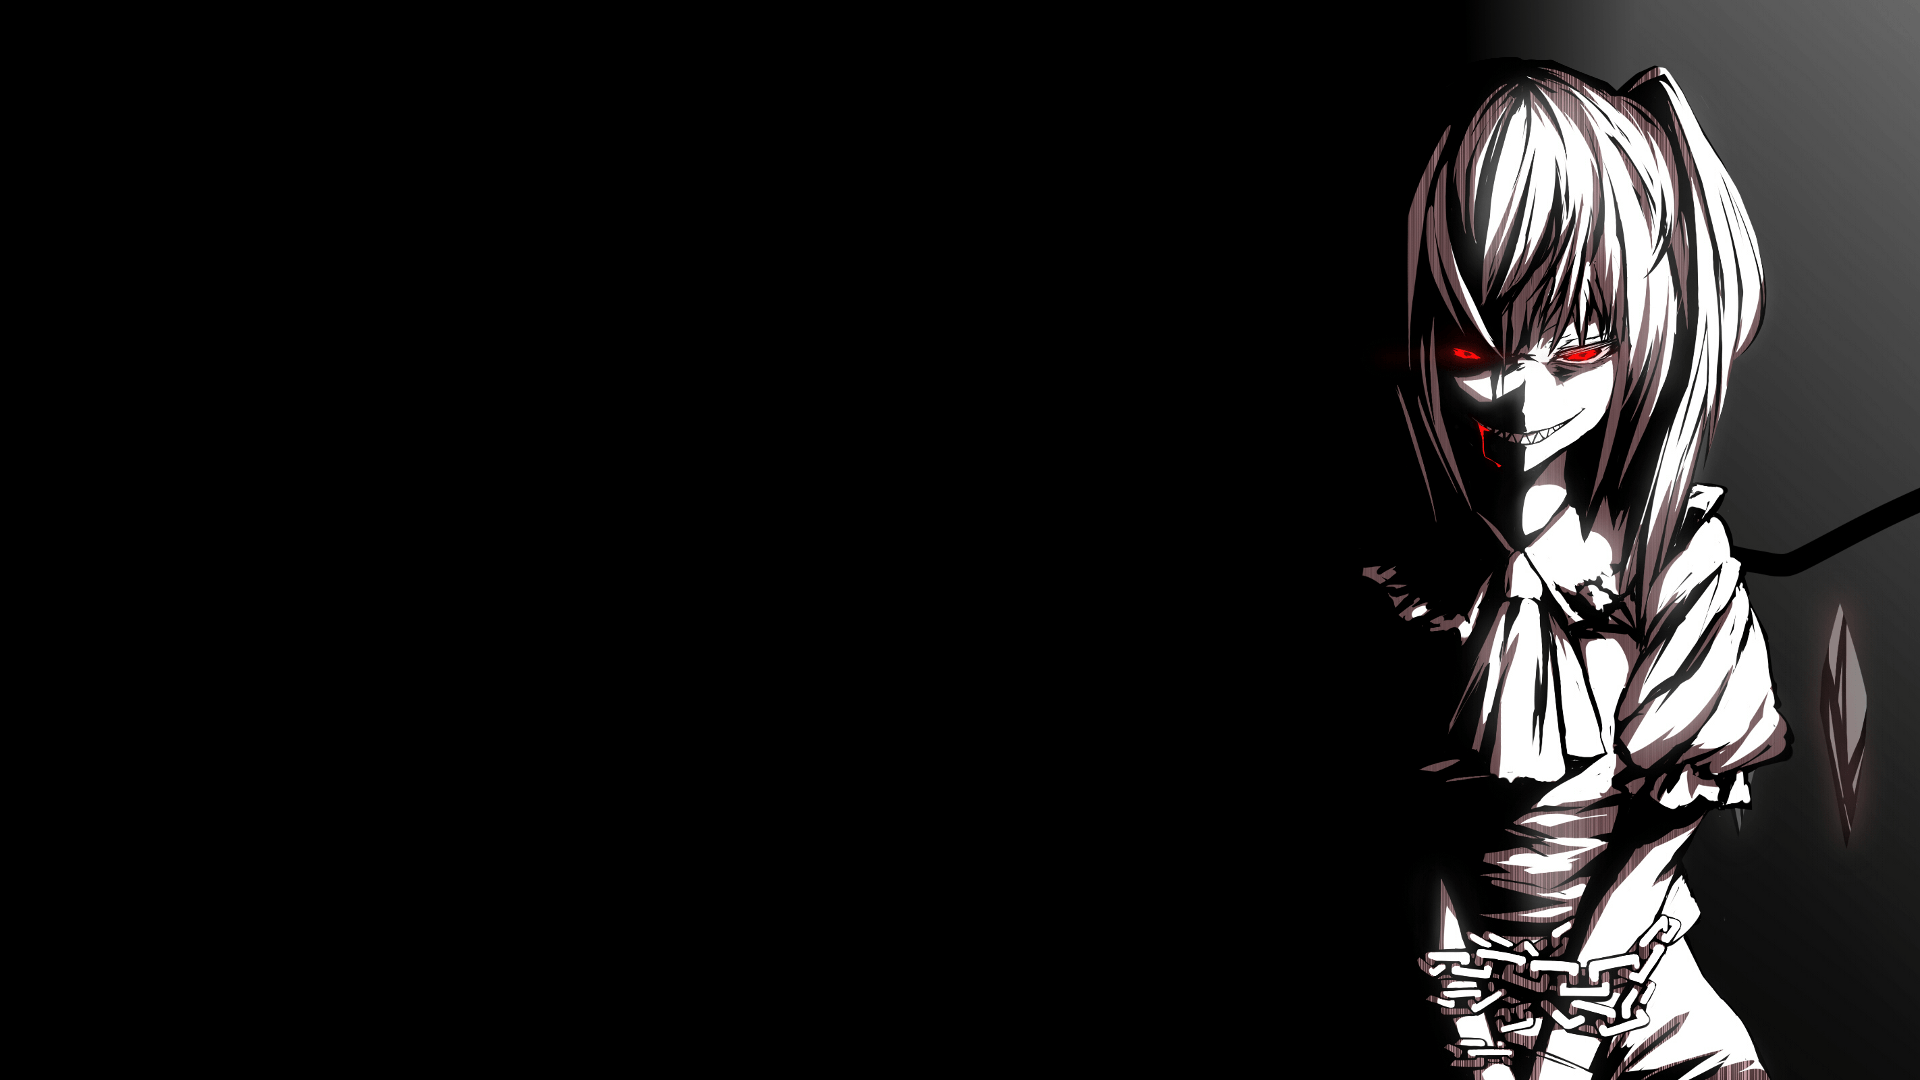 Scary anime wallpaper Gallery